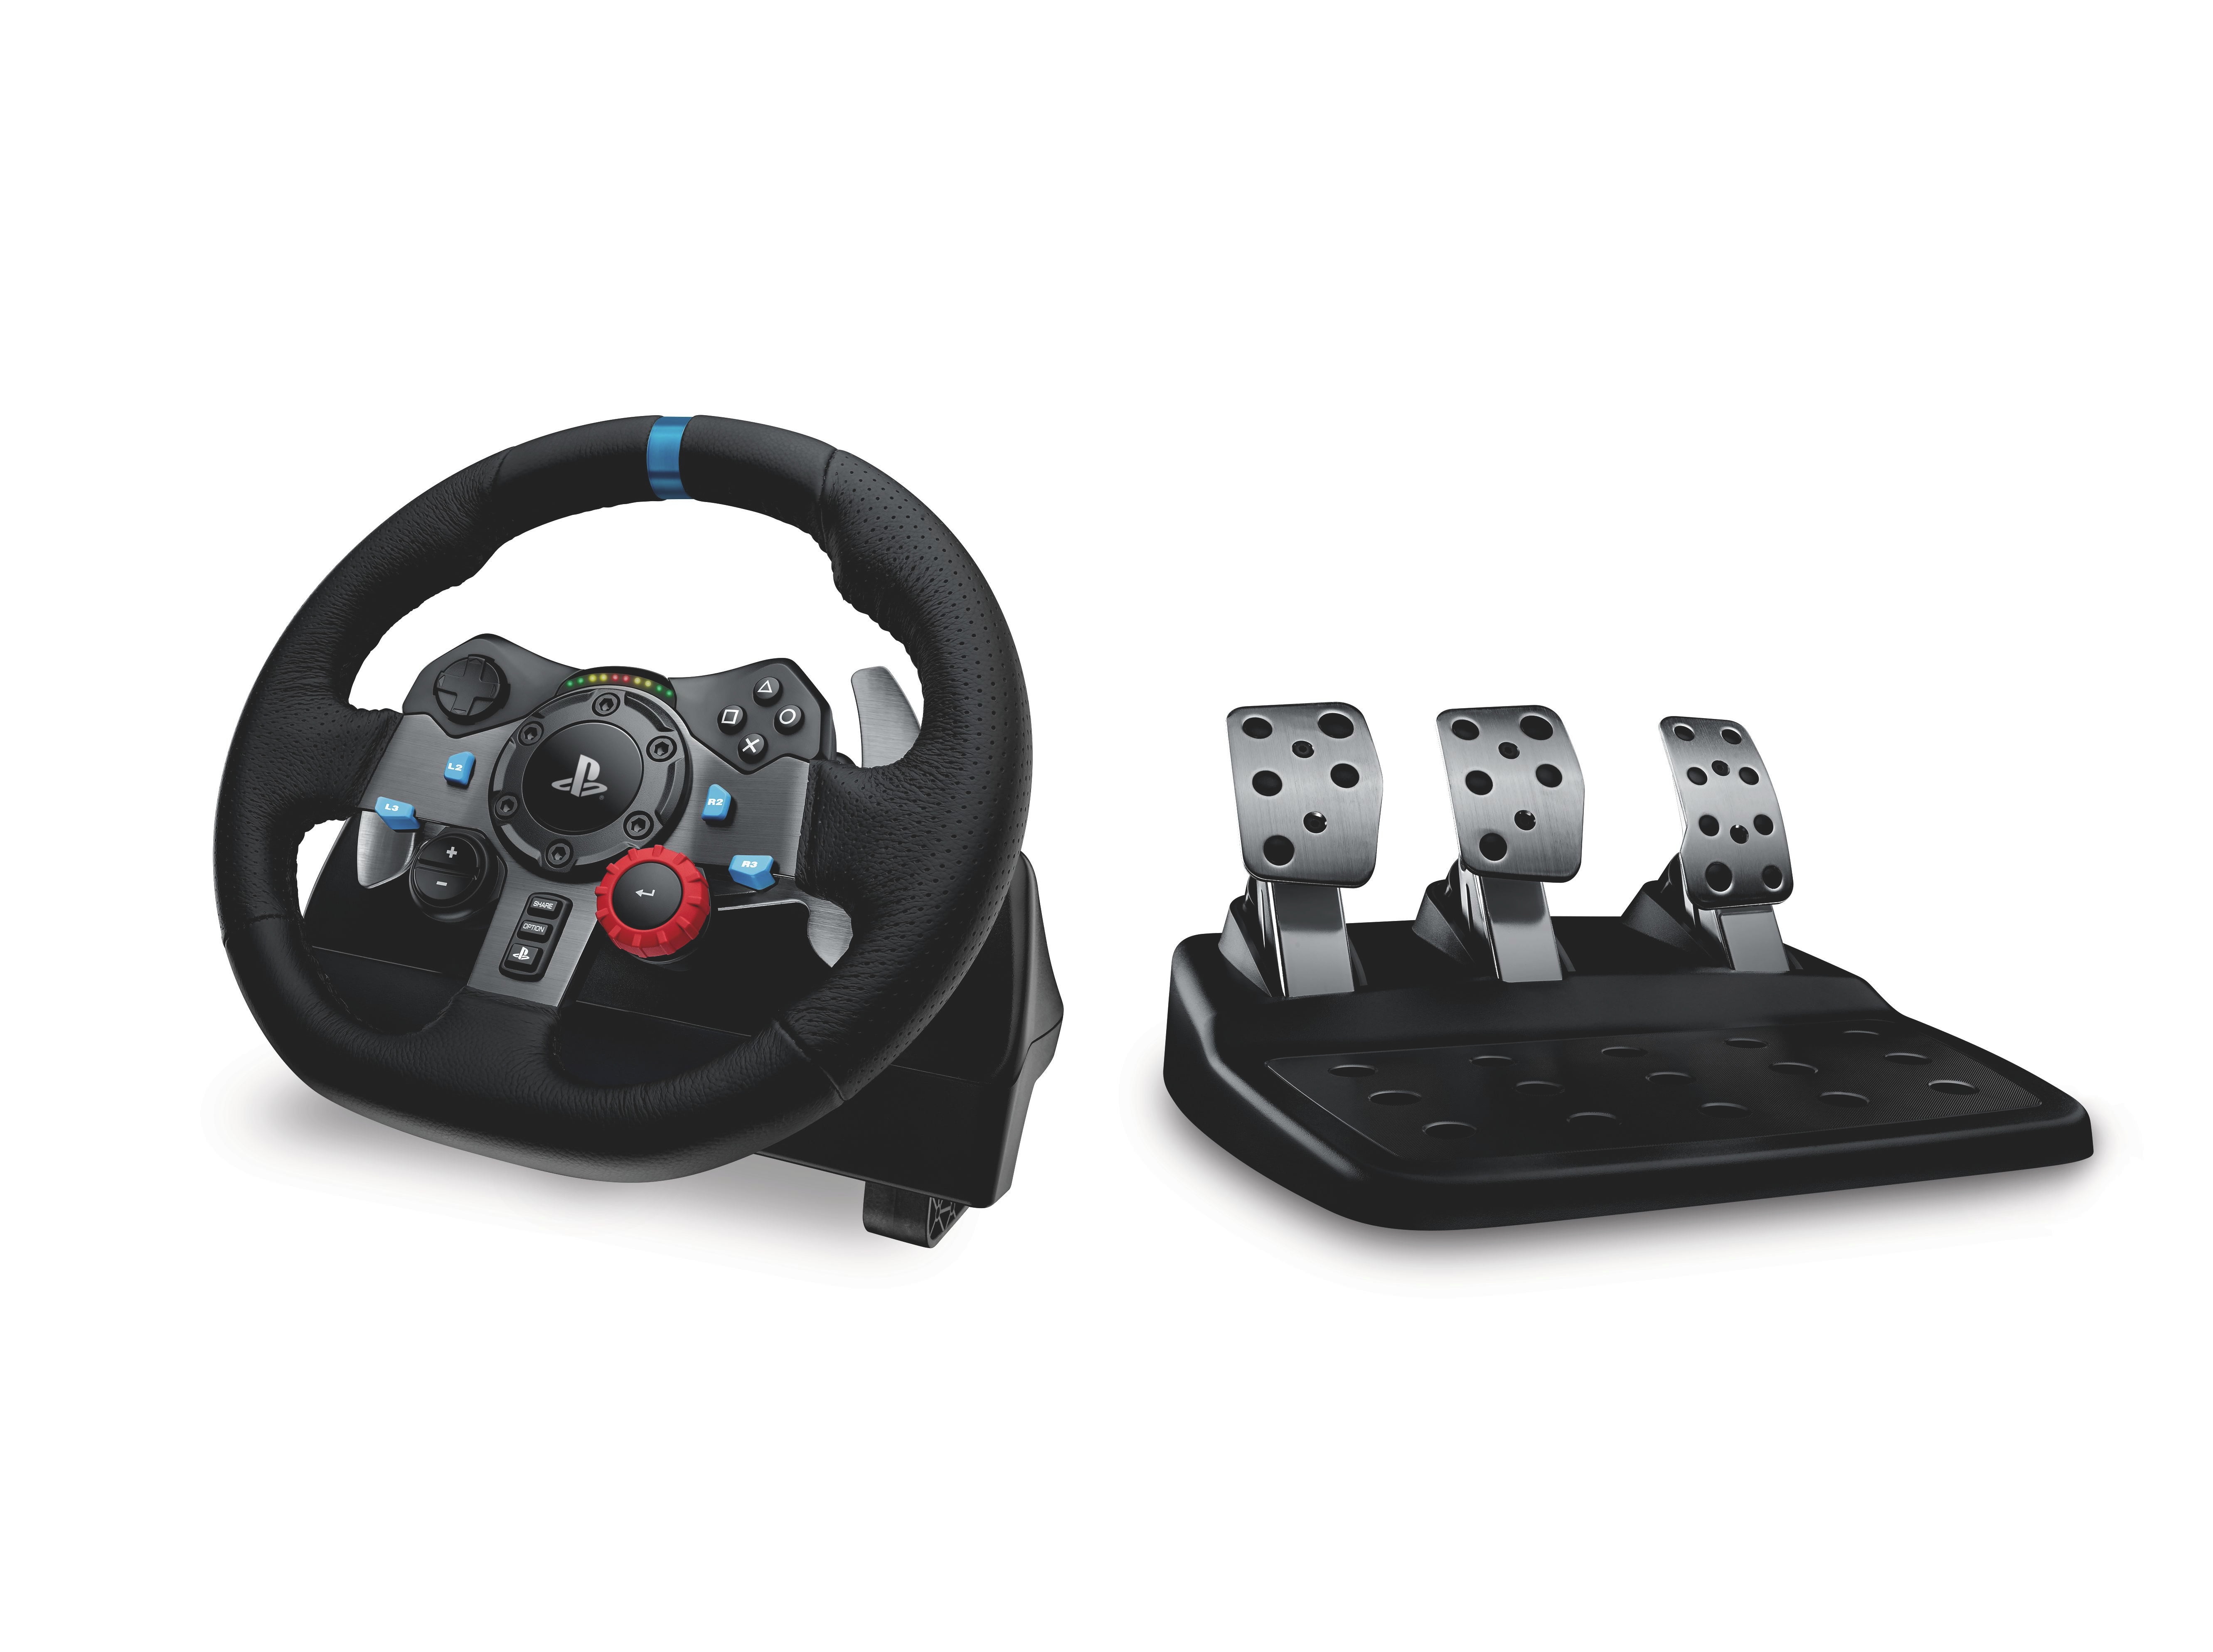 Anoi Parlament Afsnit Logitech G29 Driving Force Racing Wheel for Playstation 3 and Playstation 4  - Walmart.com